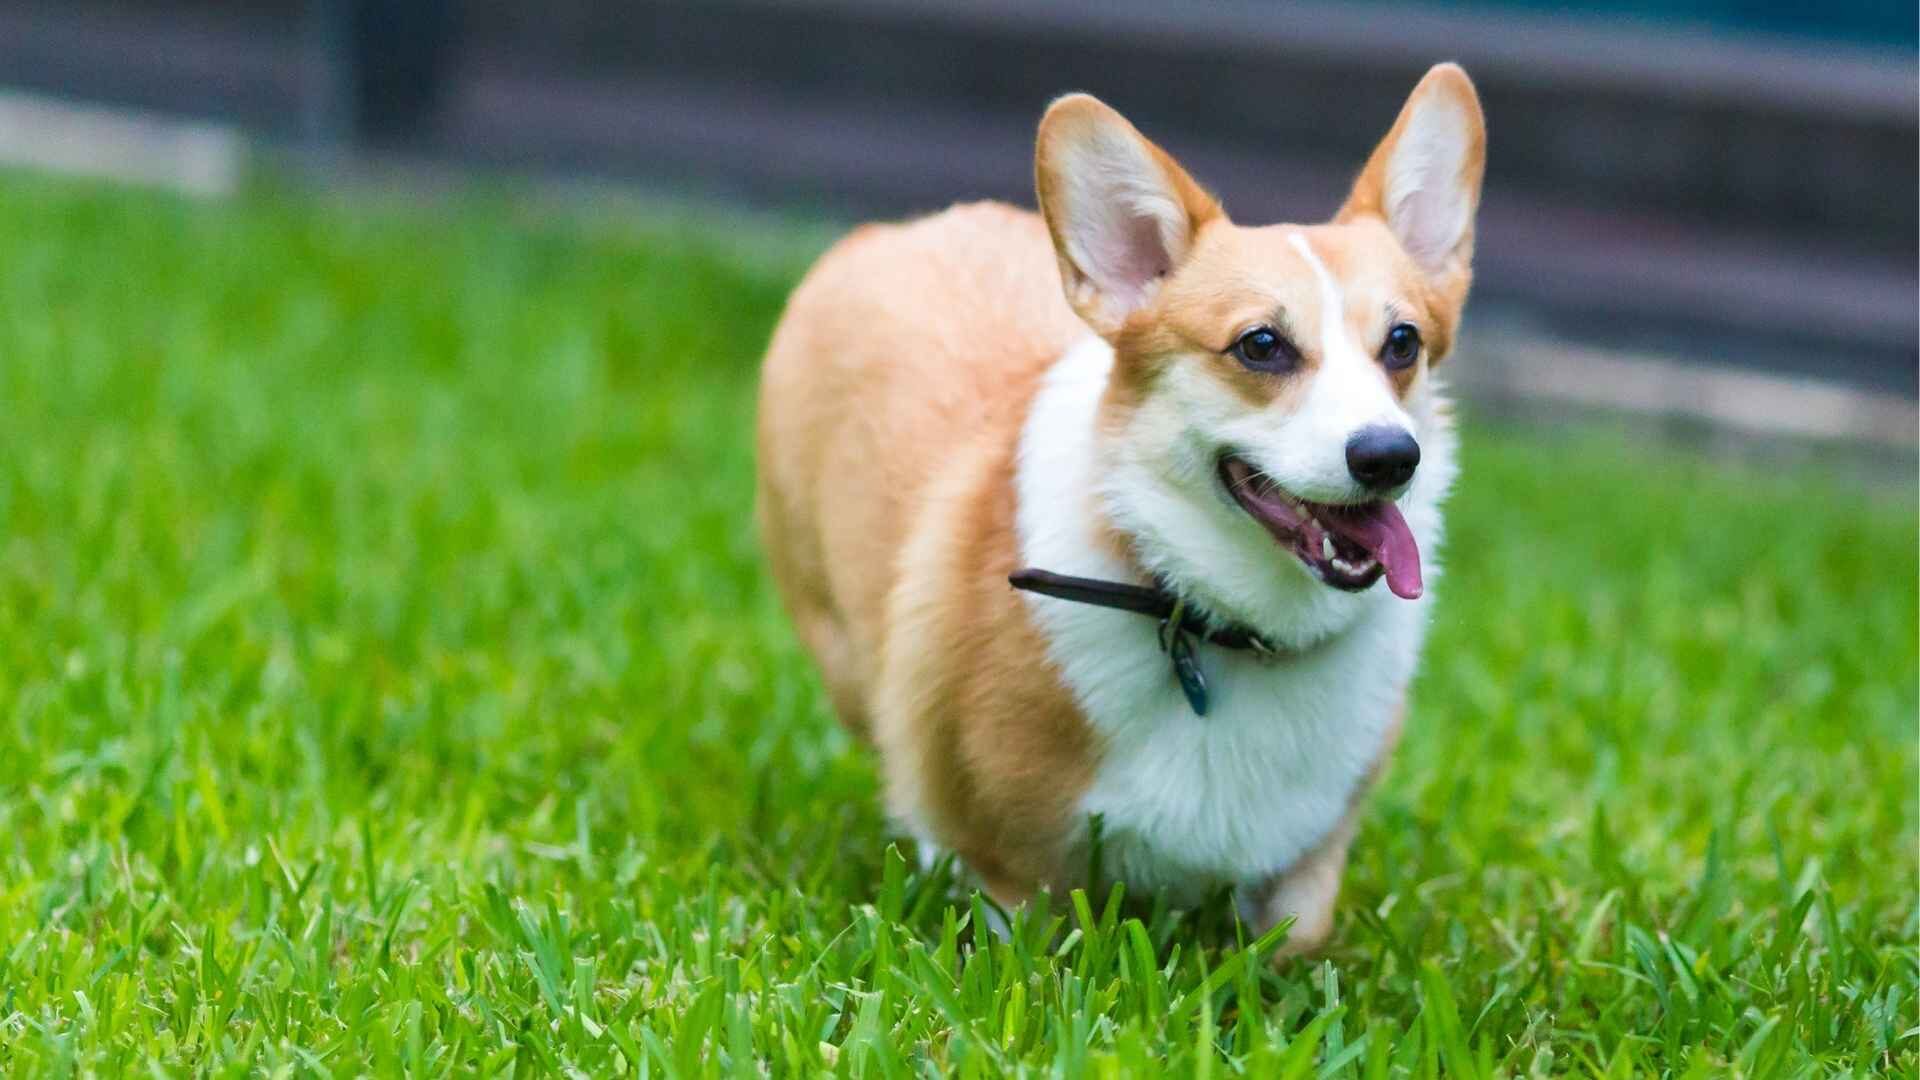 Are Corgis Good Apartment Dogs: Guide to Know Before Getting